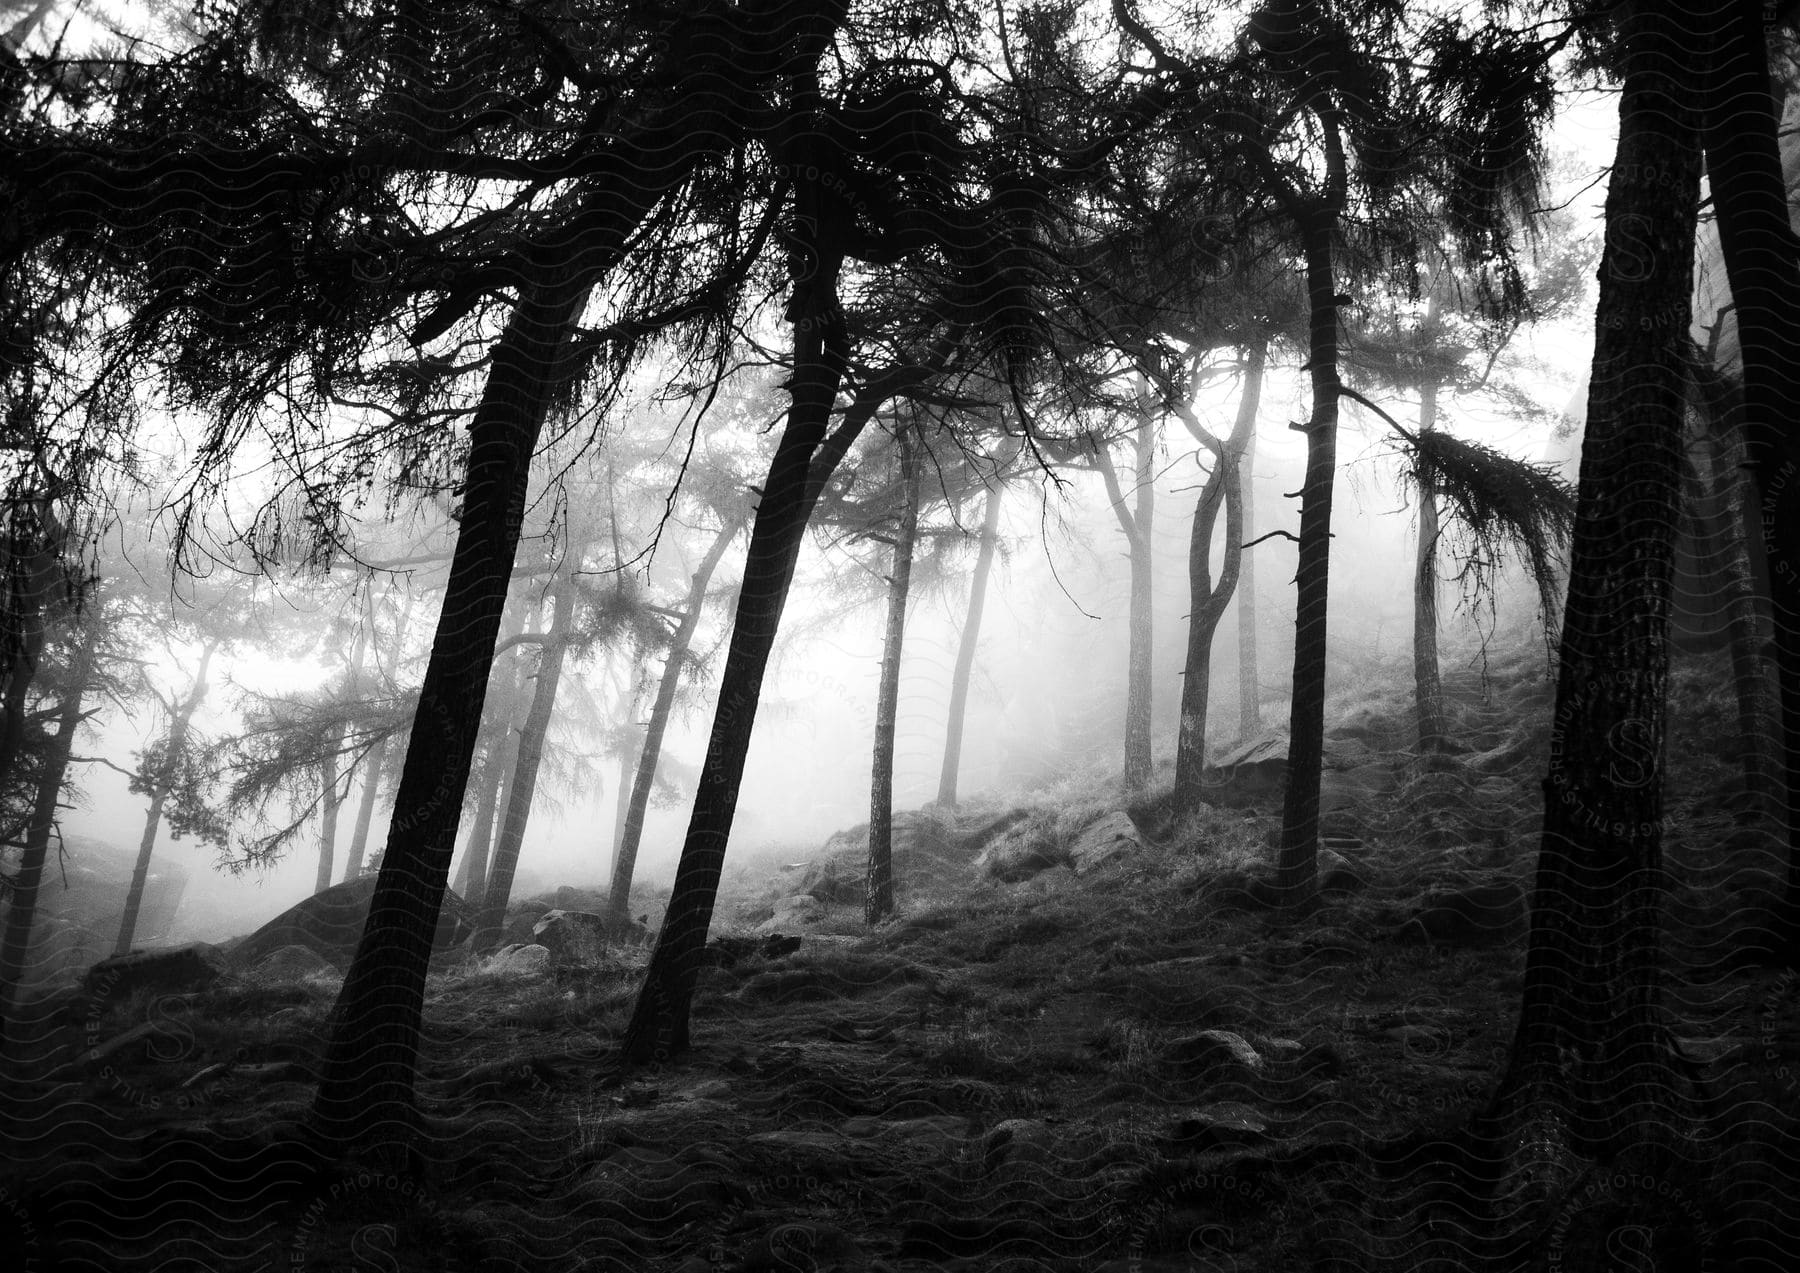 A foggy forest with rocks surrounded by trees